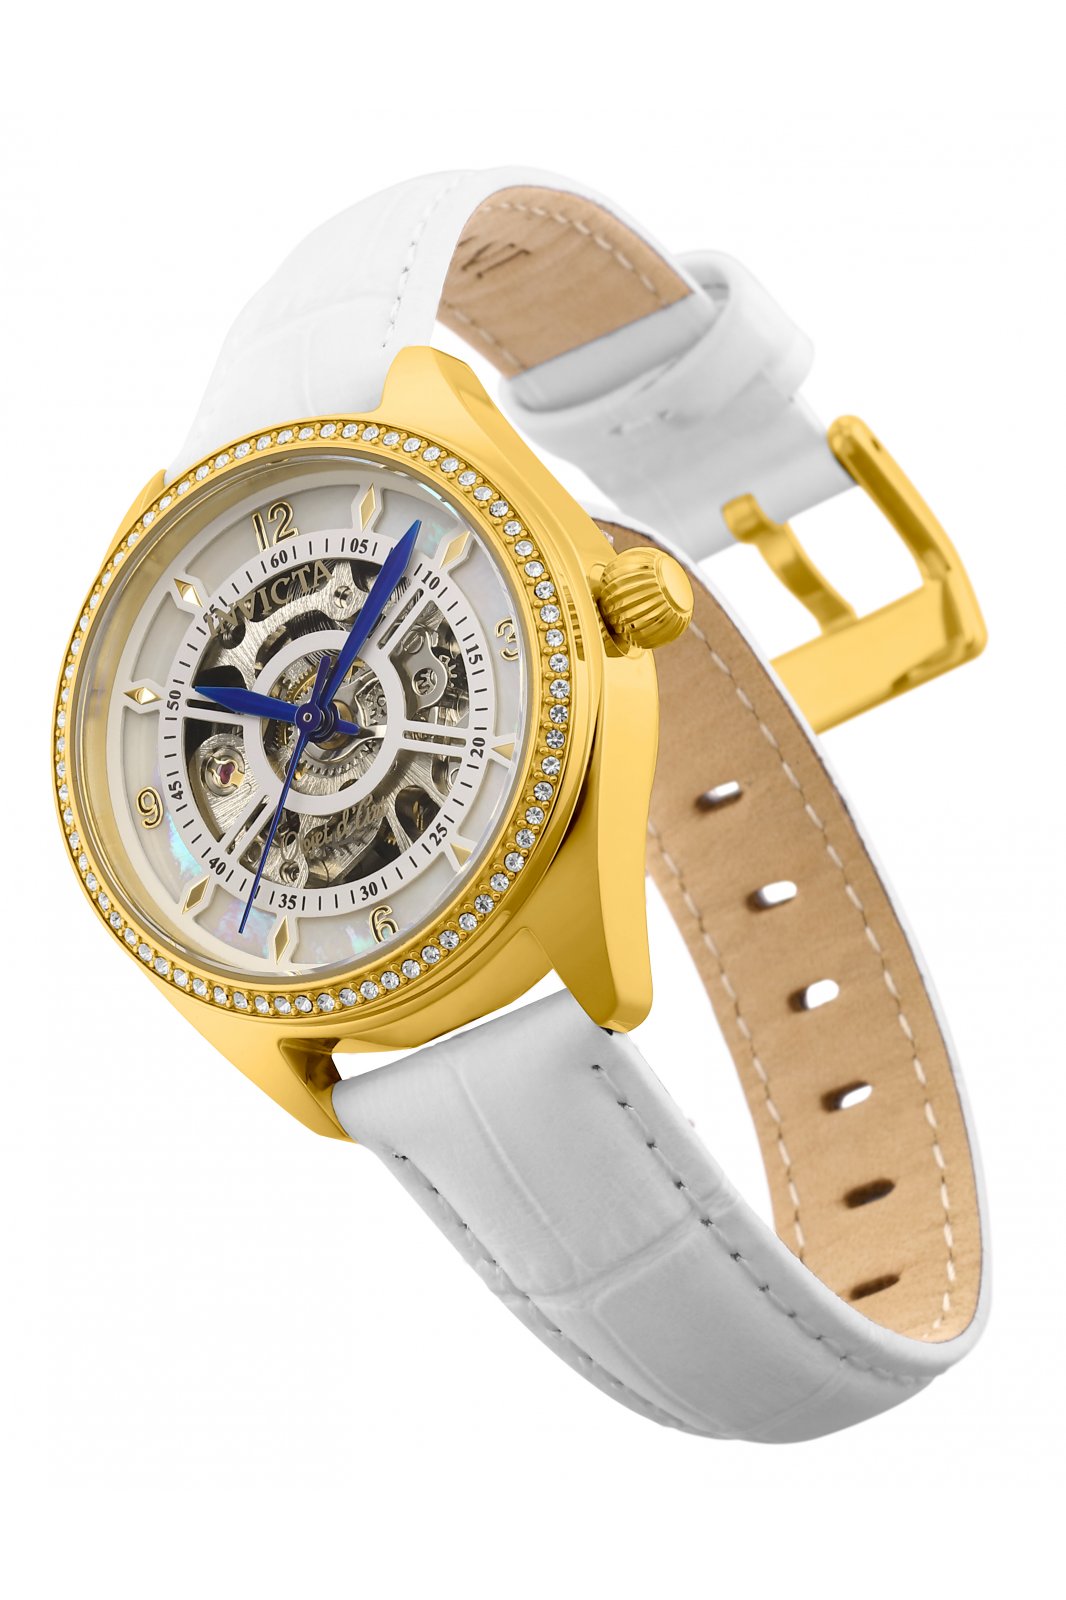 Invicta Watch Objet D Art 26352 - Official Invicta Store - Buy Online!